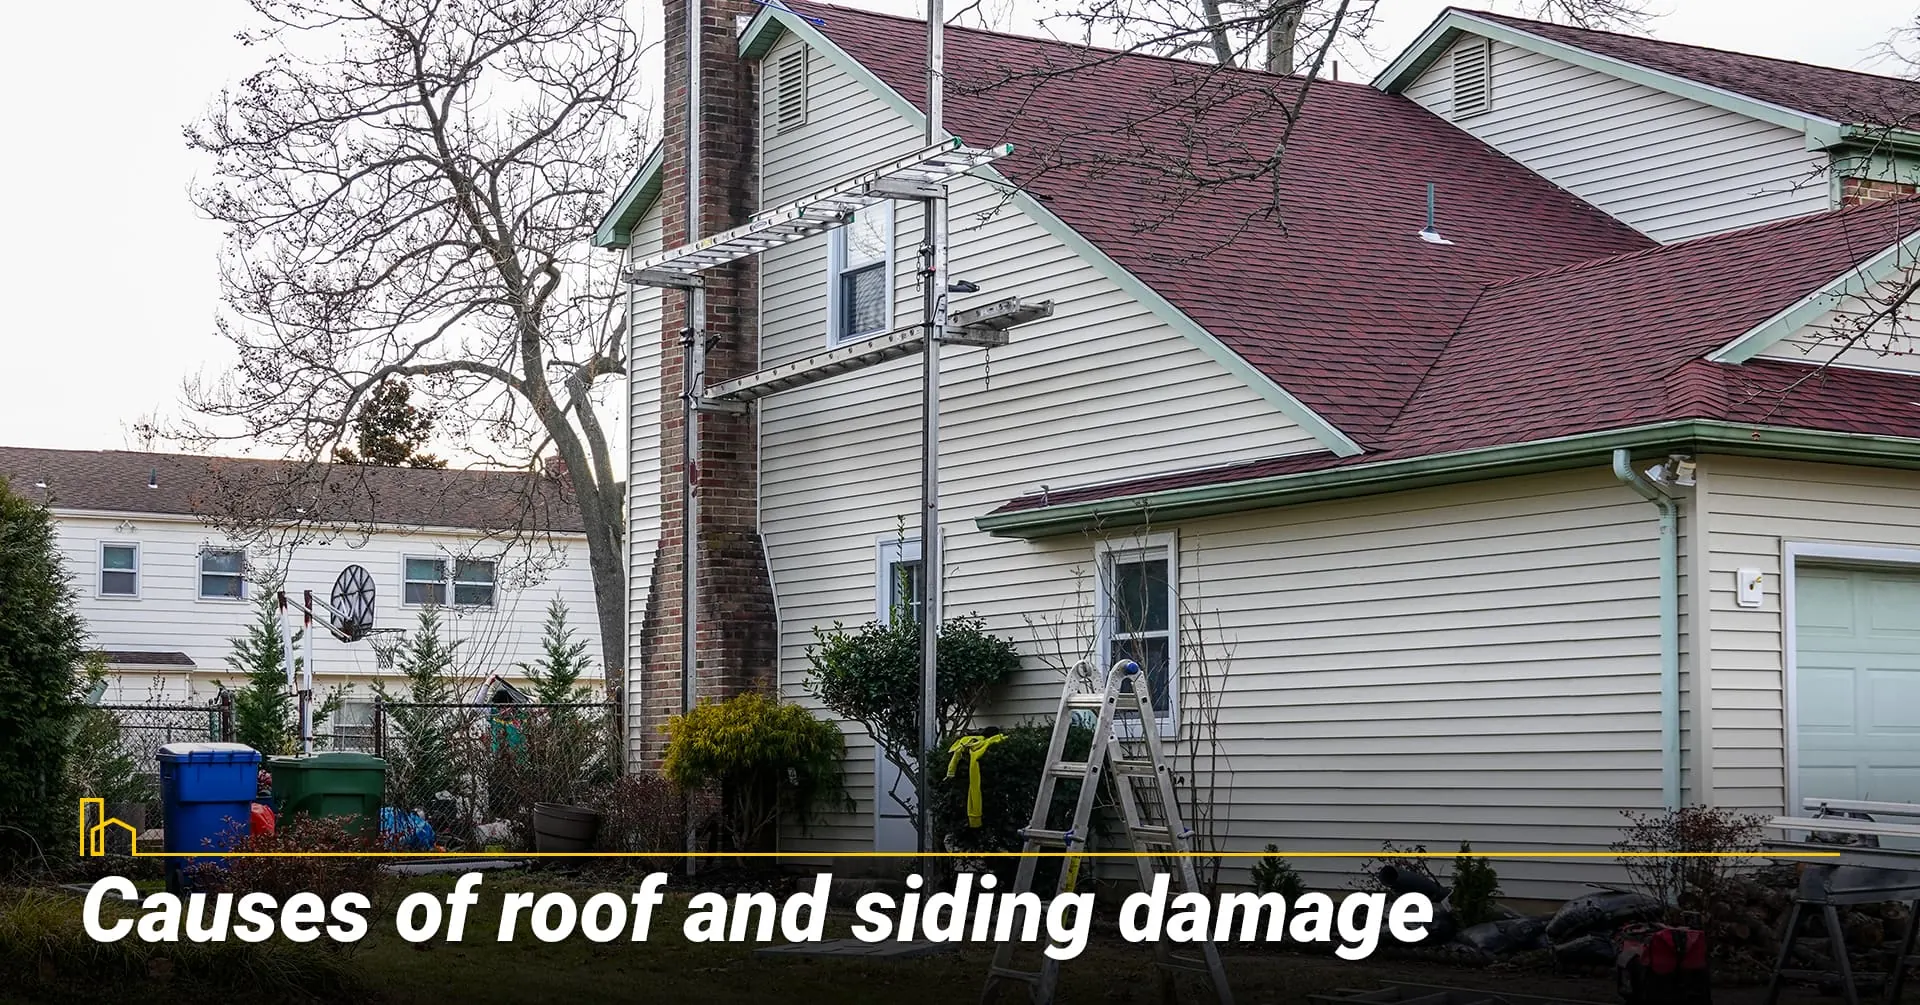 I. Causes of roof and siding damage